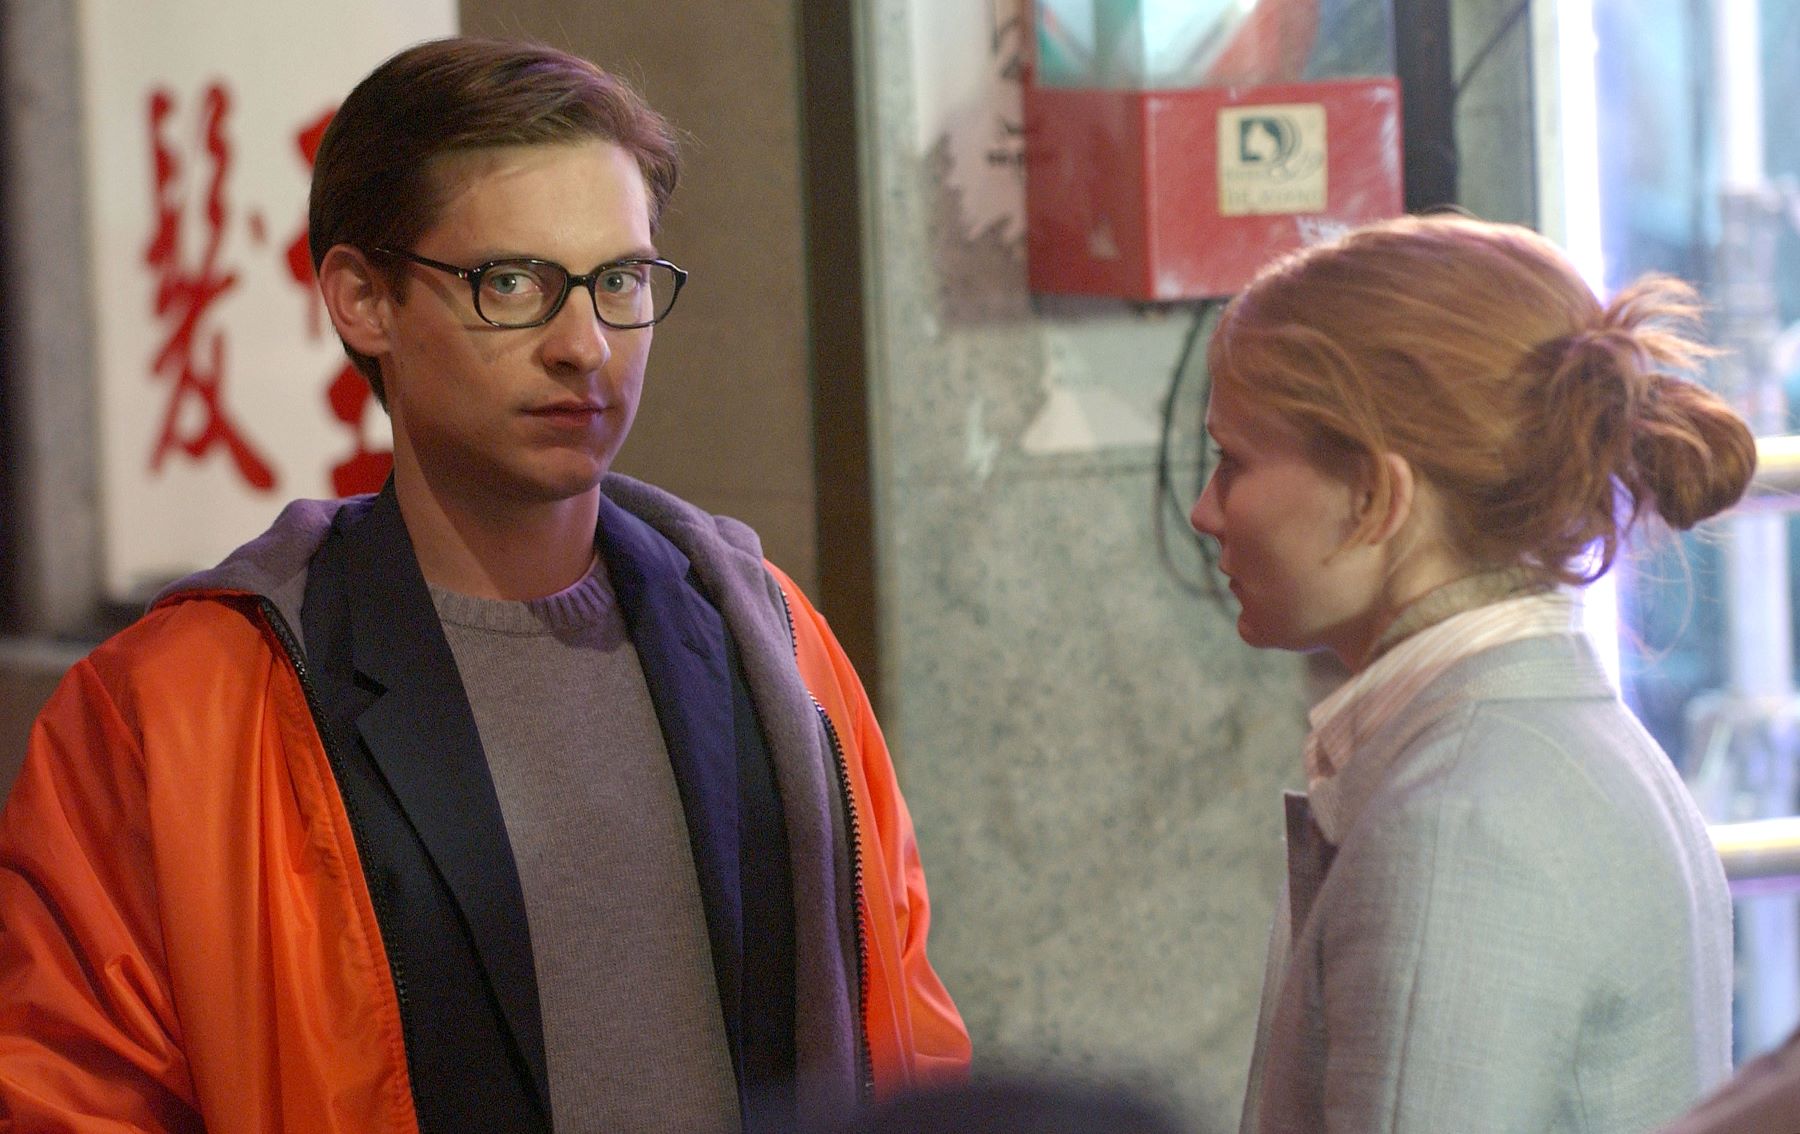 Tobey Maguire and Kirsten Dunst filming 'Spider-Man' in Chinatown of New York City